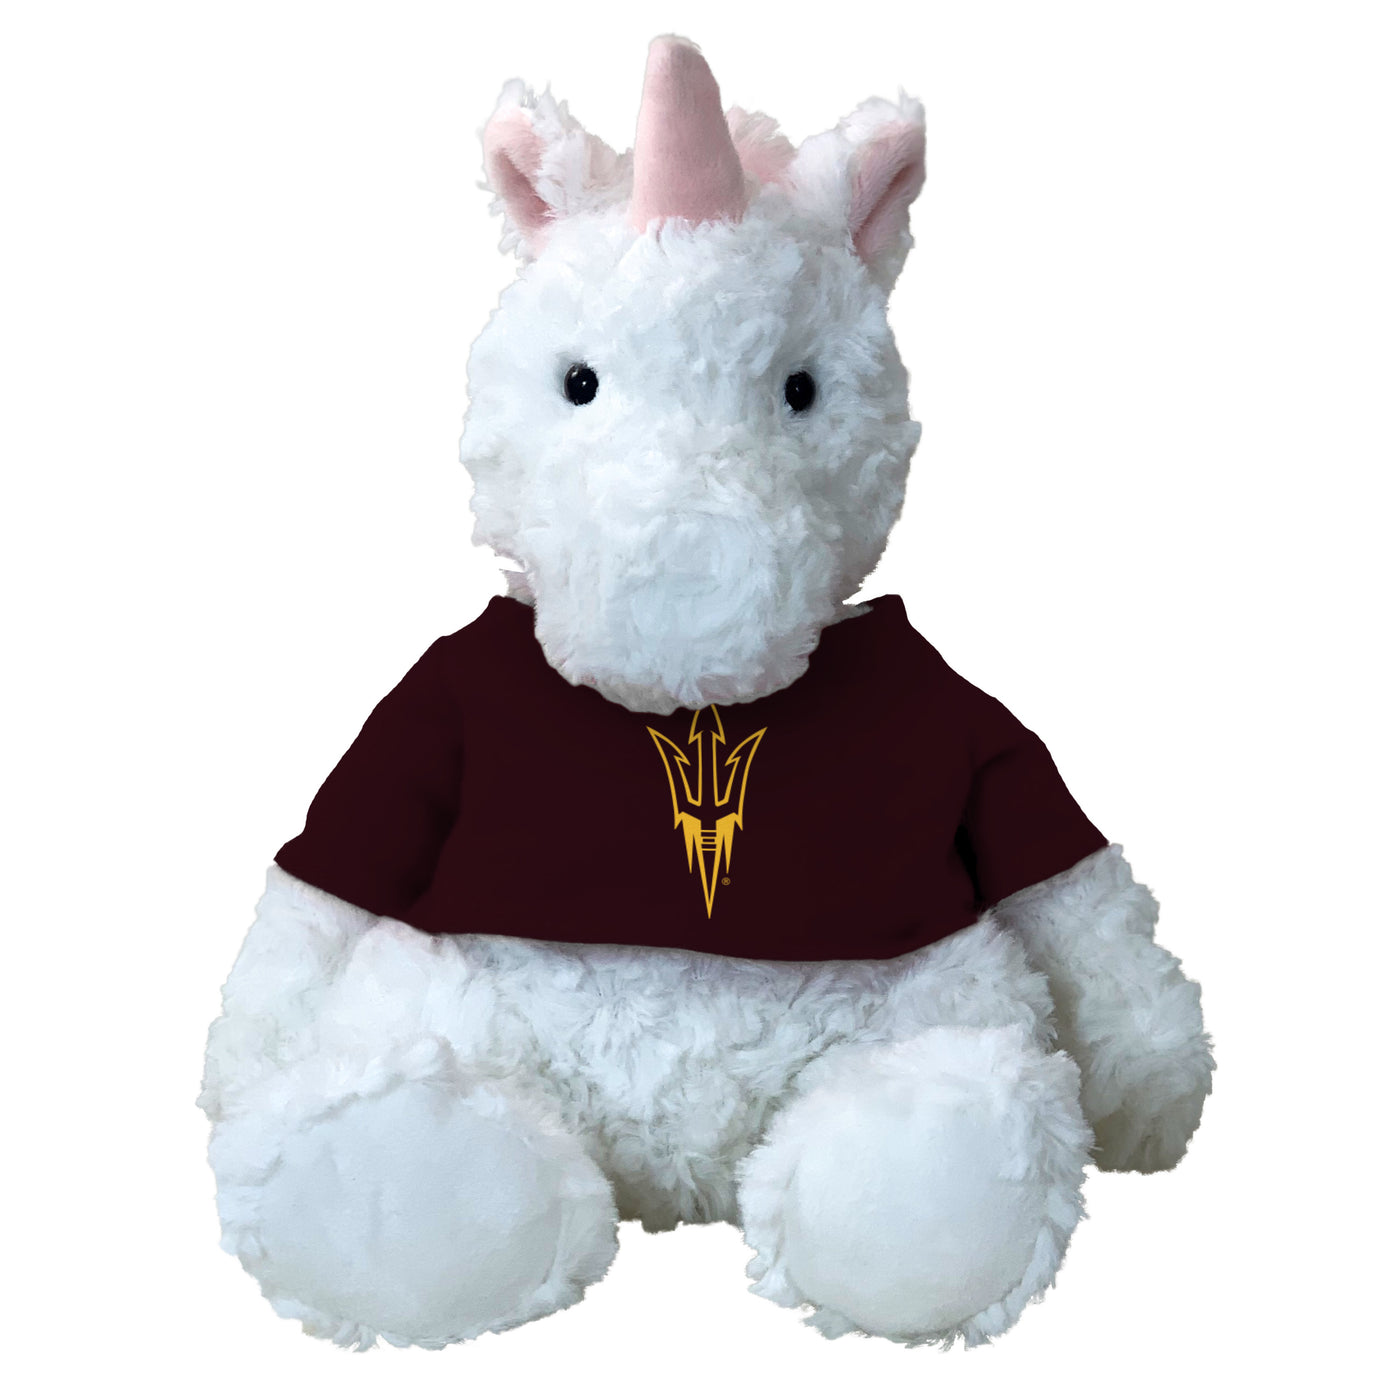 ASU Stuffed white unicorn with pink horn and mane. The unicorn is wearing a maroon shirt with the gold pitchfork logo.